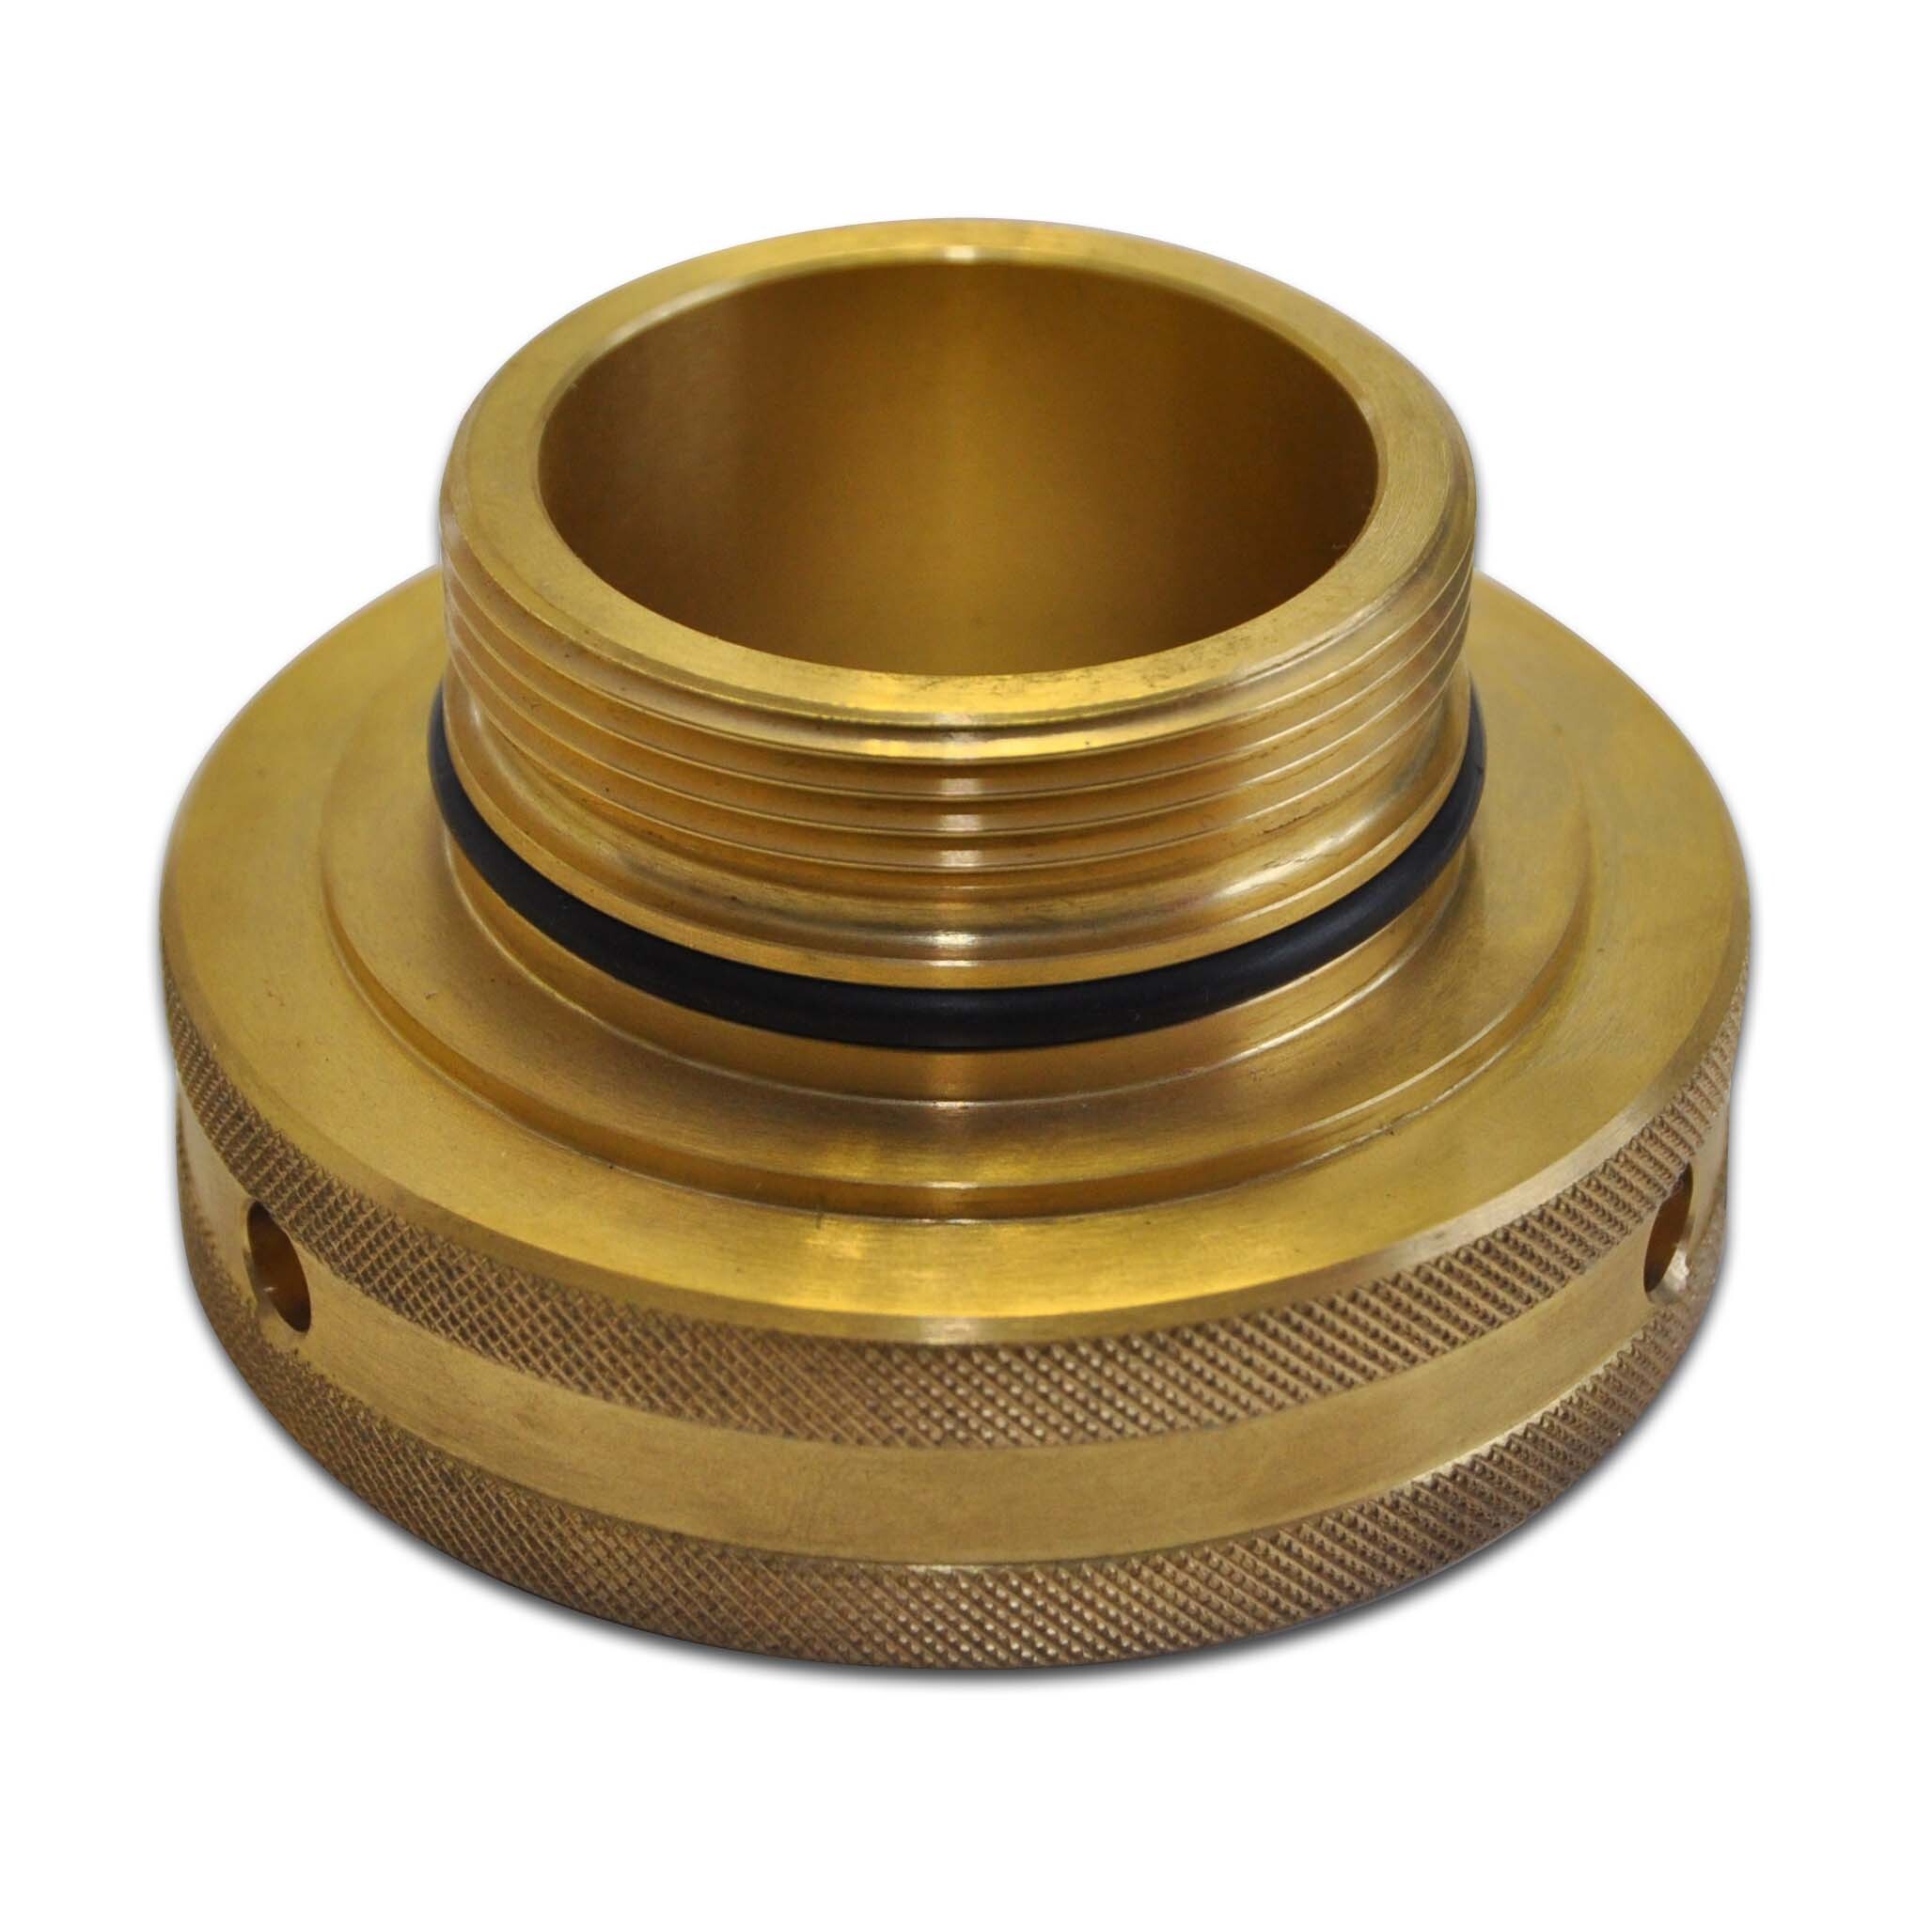 Adapter DM Plasson brass for HEINZ, ext. thread with pre-installed o-ring on gasket side